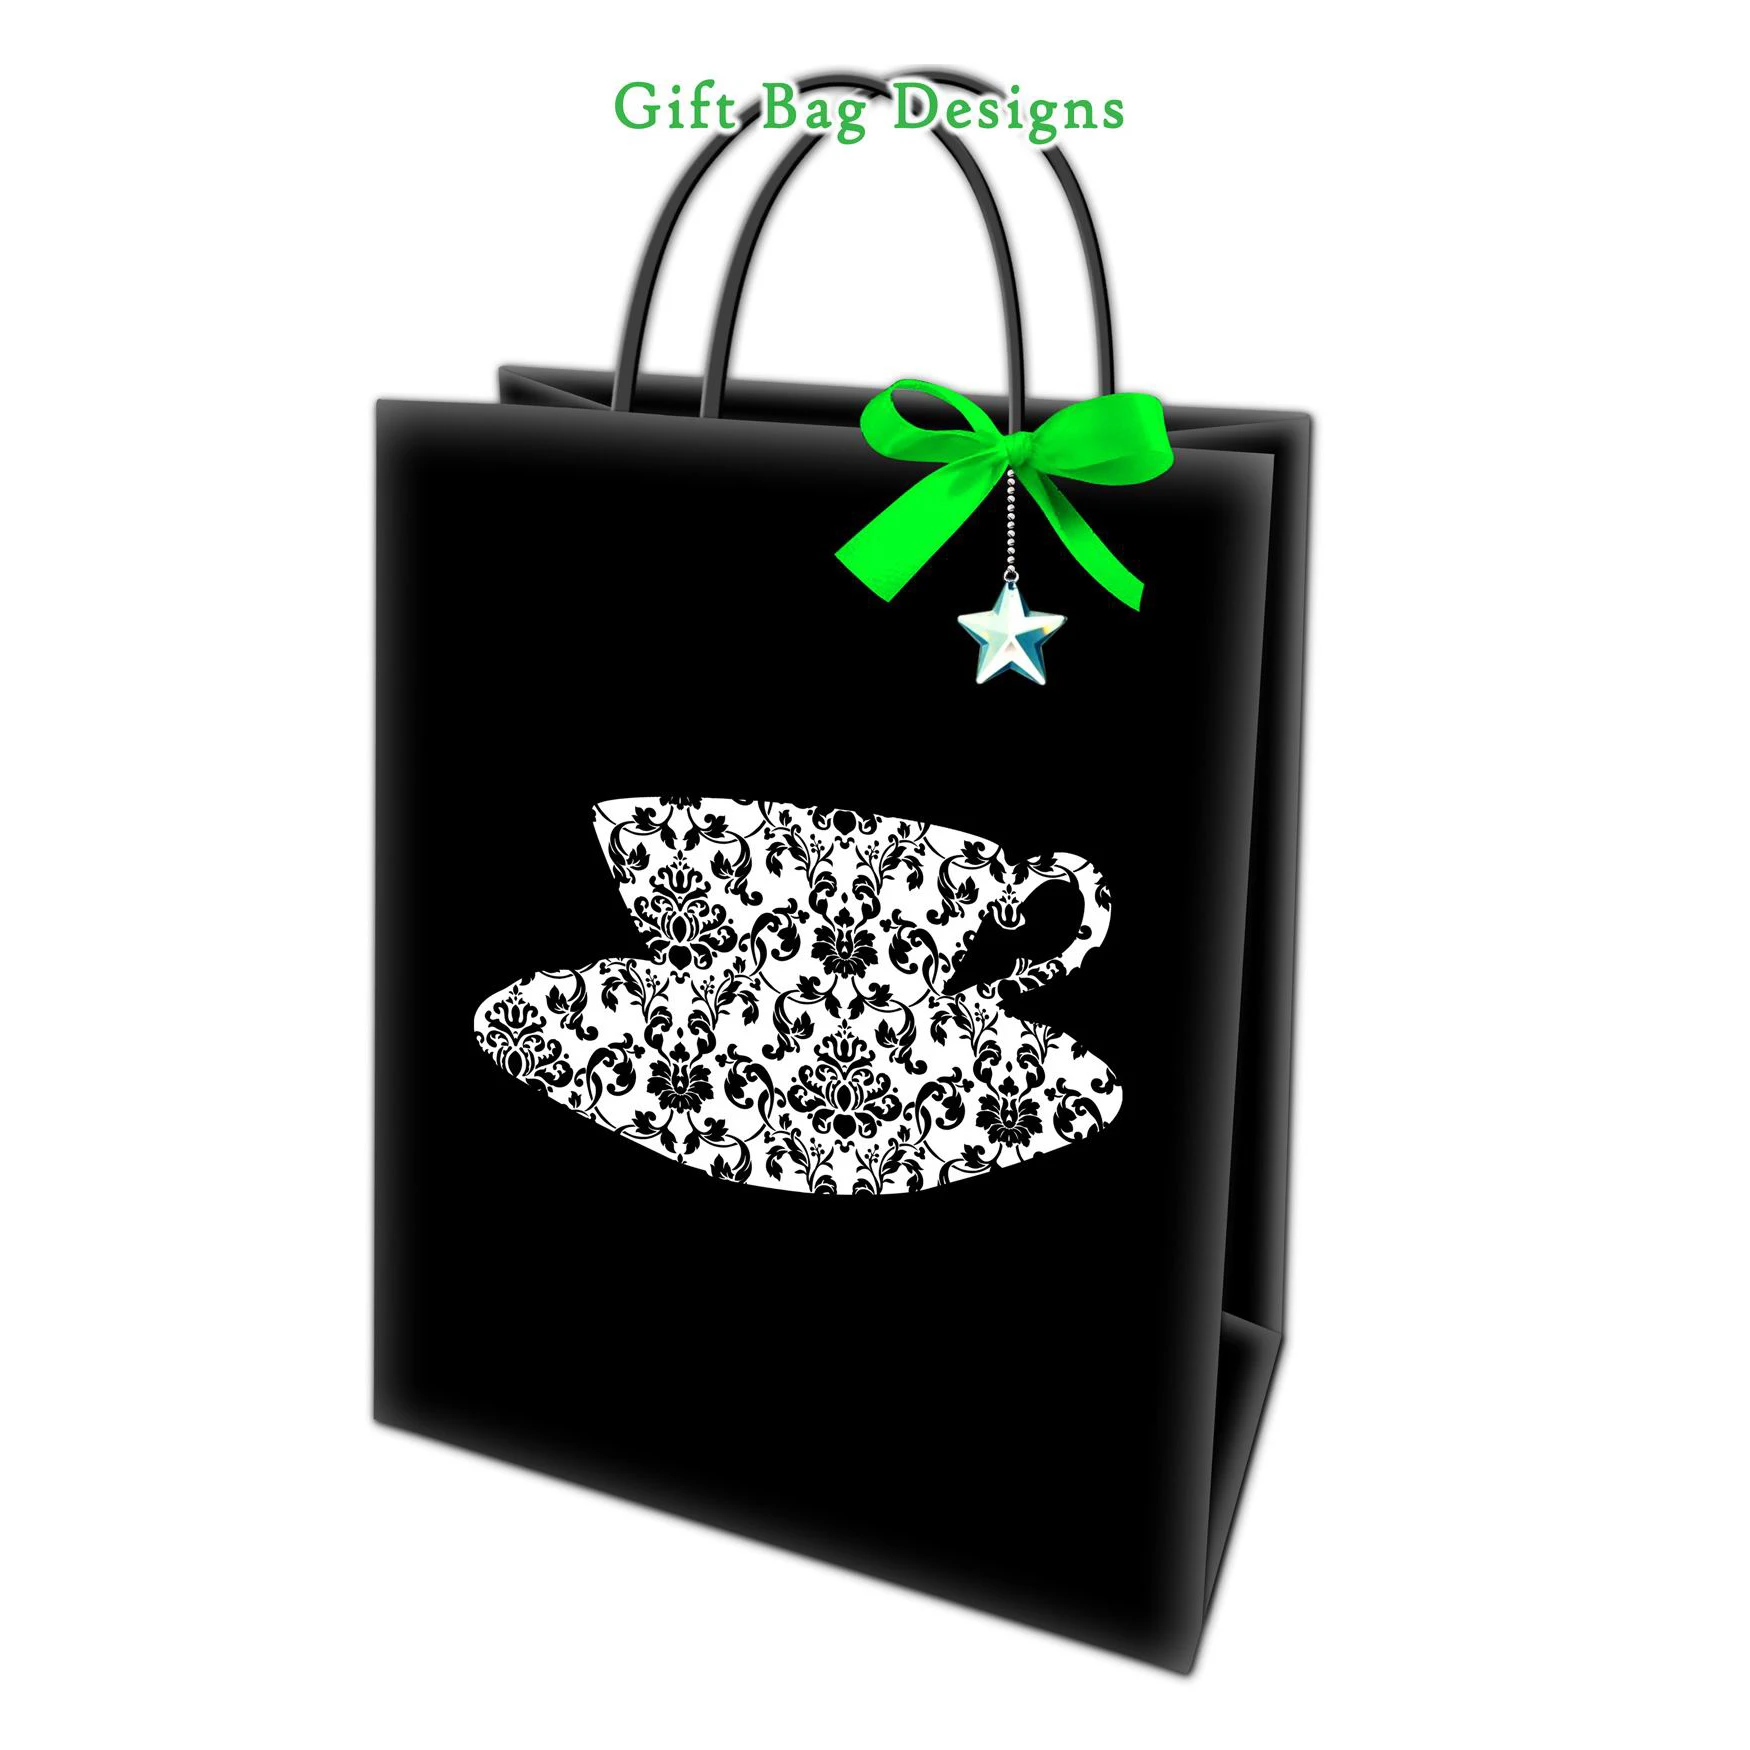 Jialan Package gift bags wholesale company for packing gifts